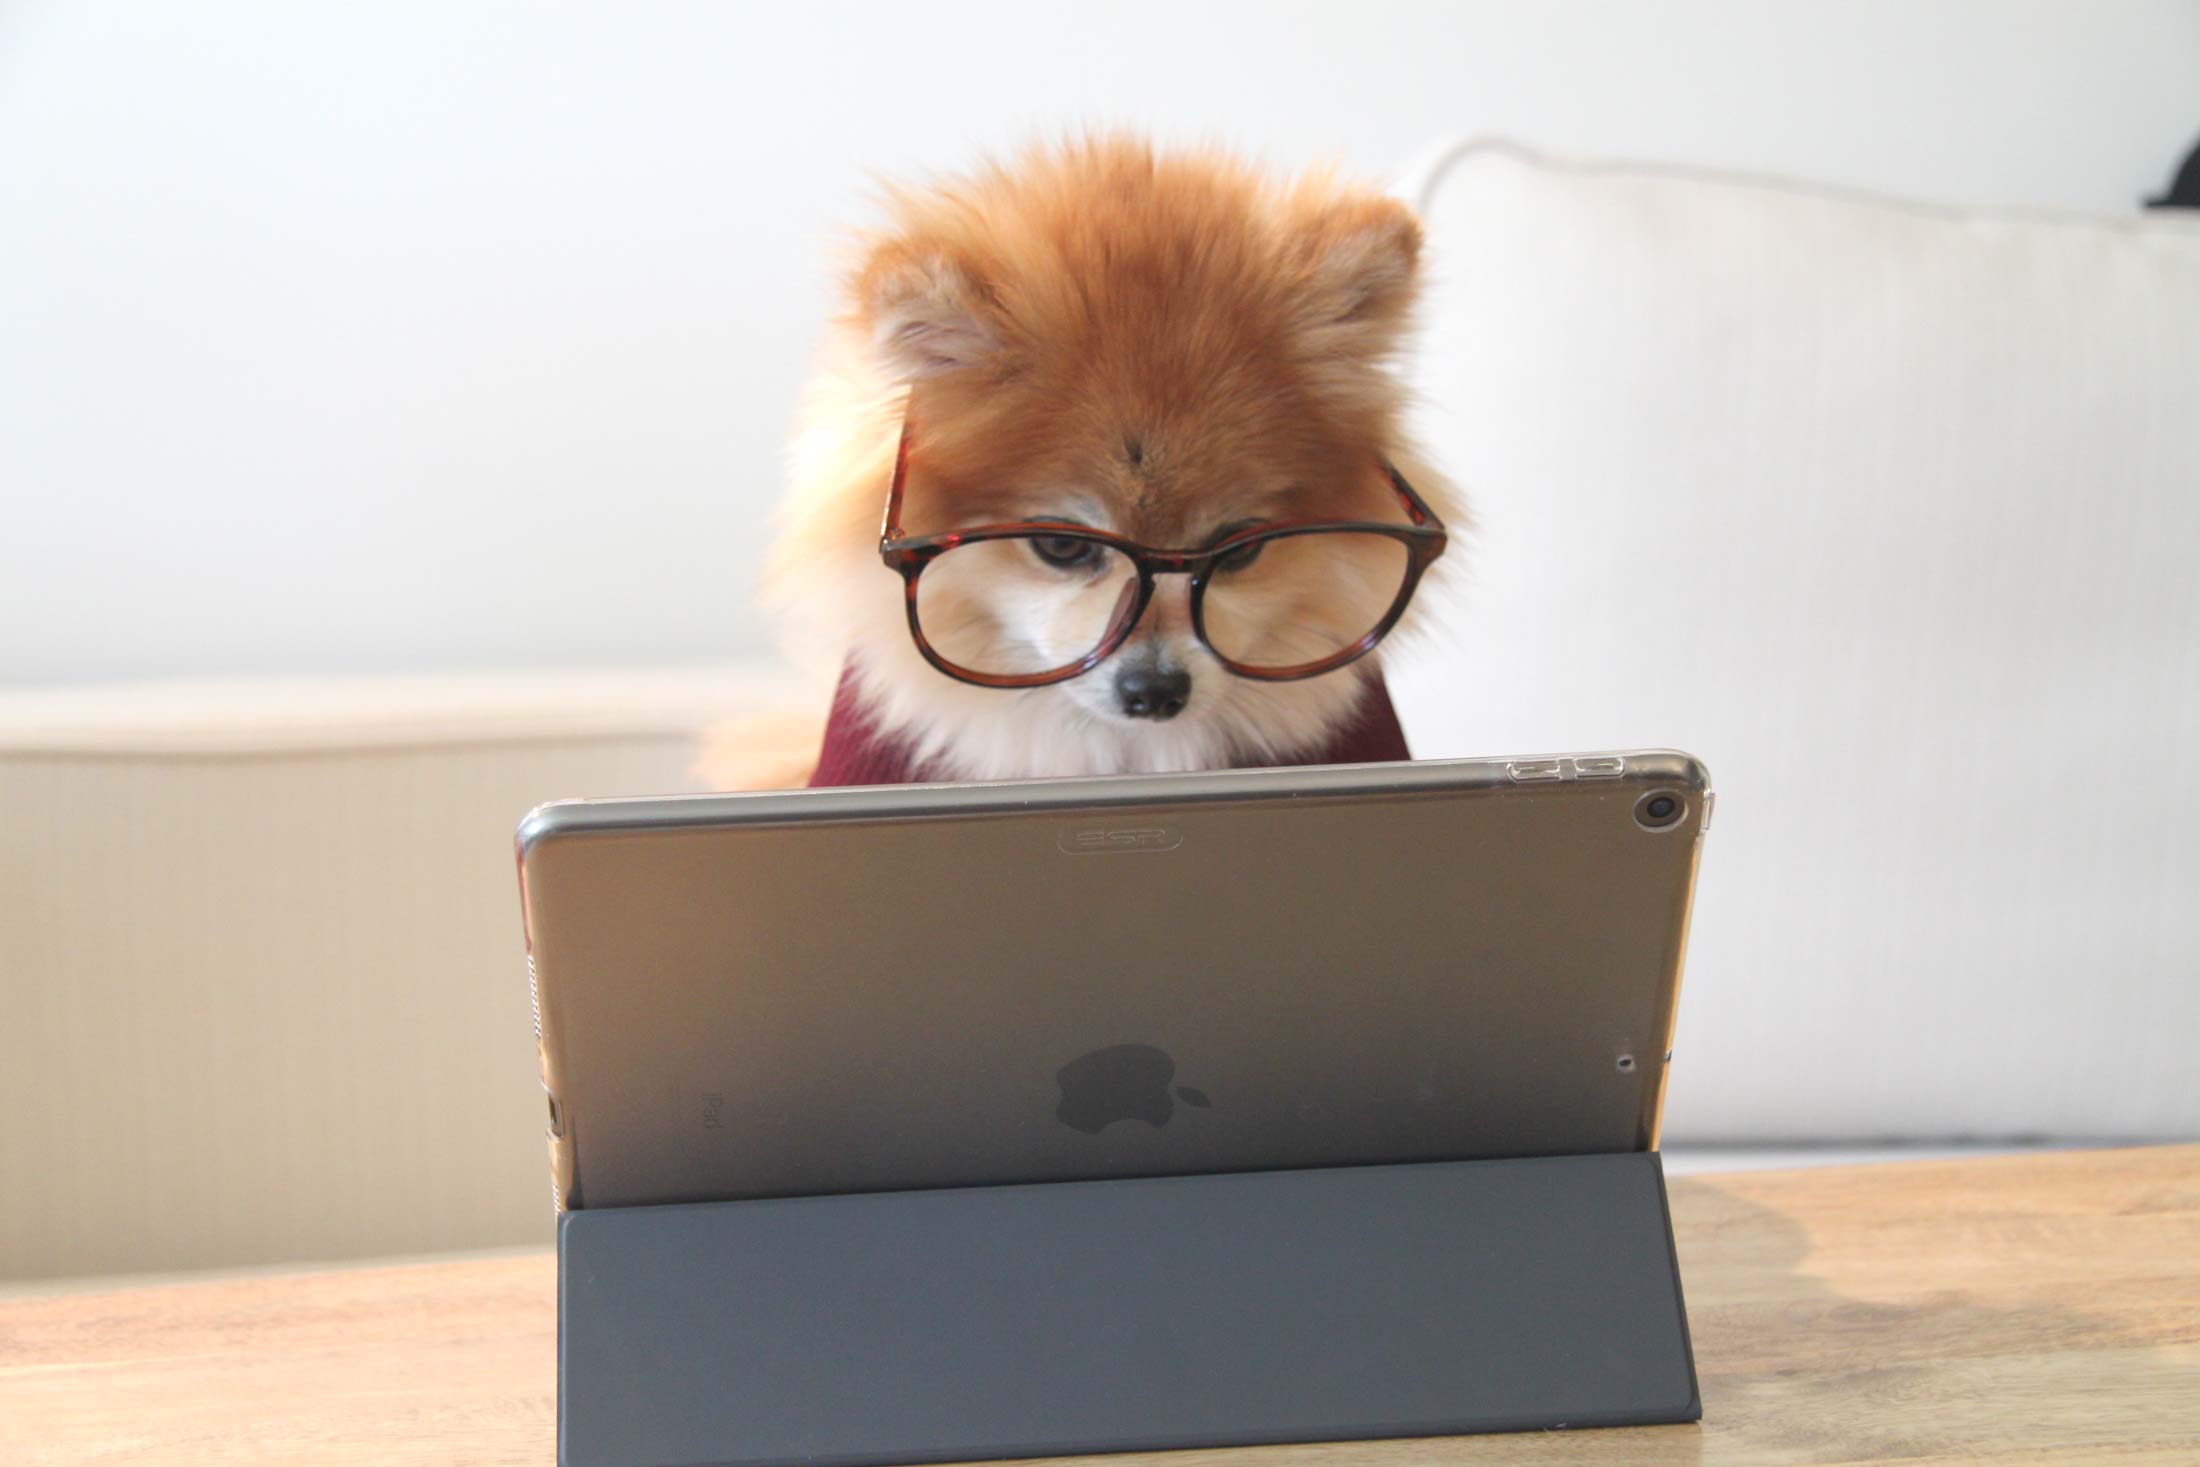 Orange and white Pomeranian dog wearing thick-framed glasses looking at an iPad